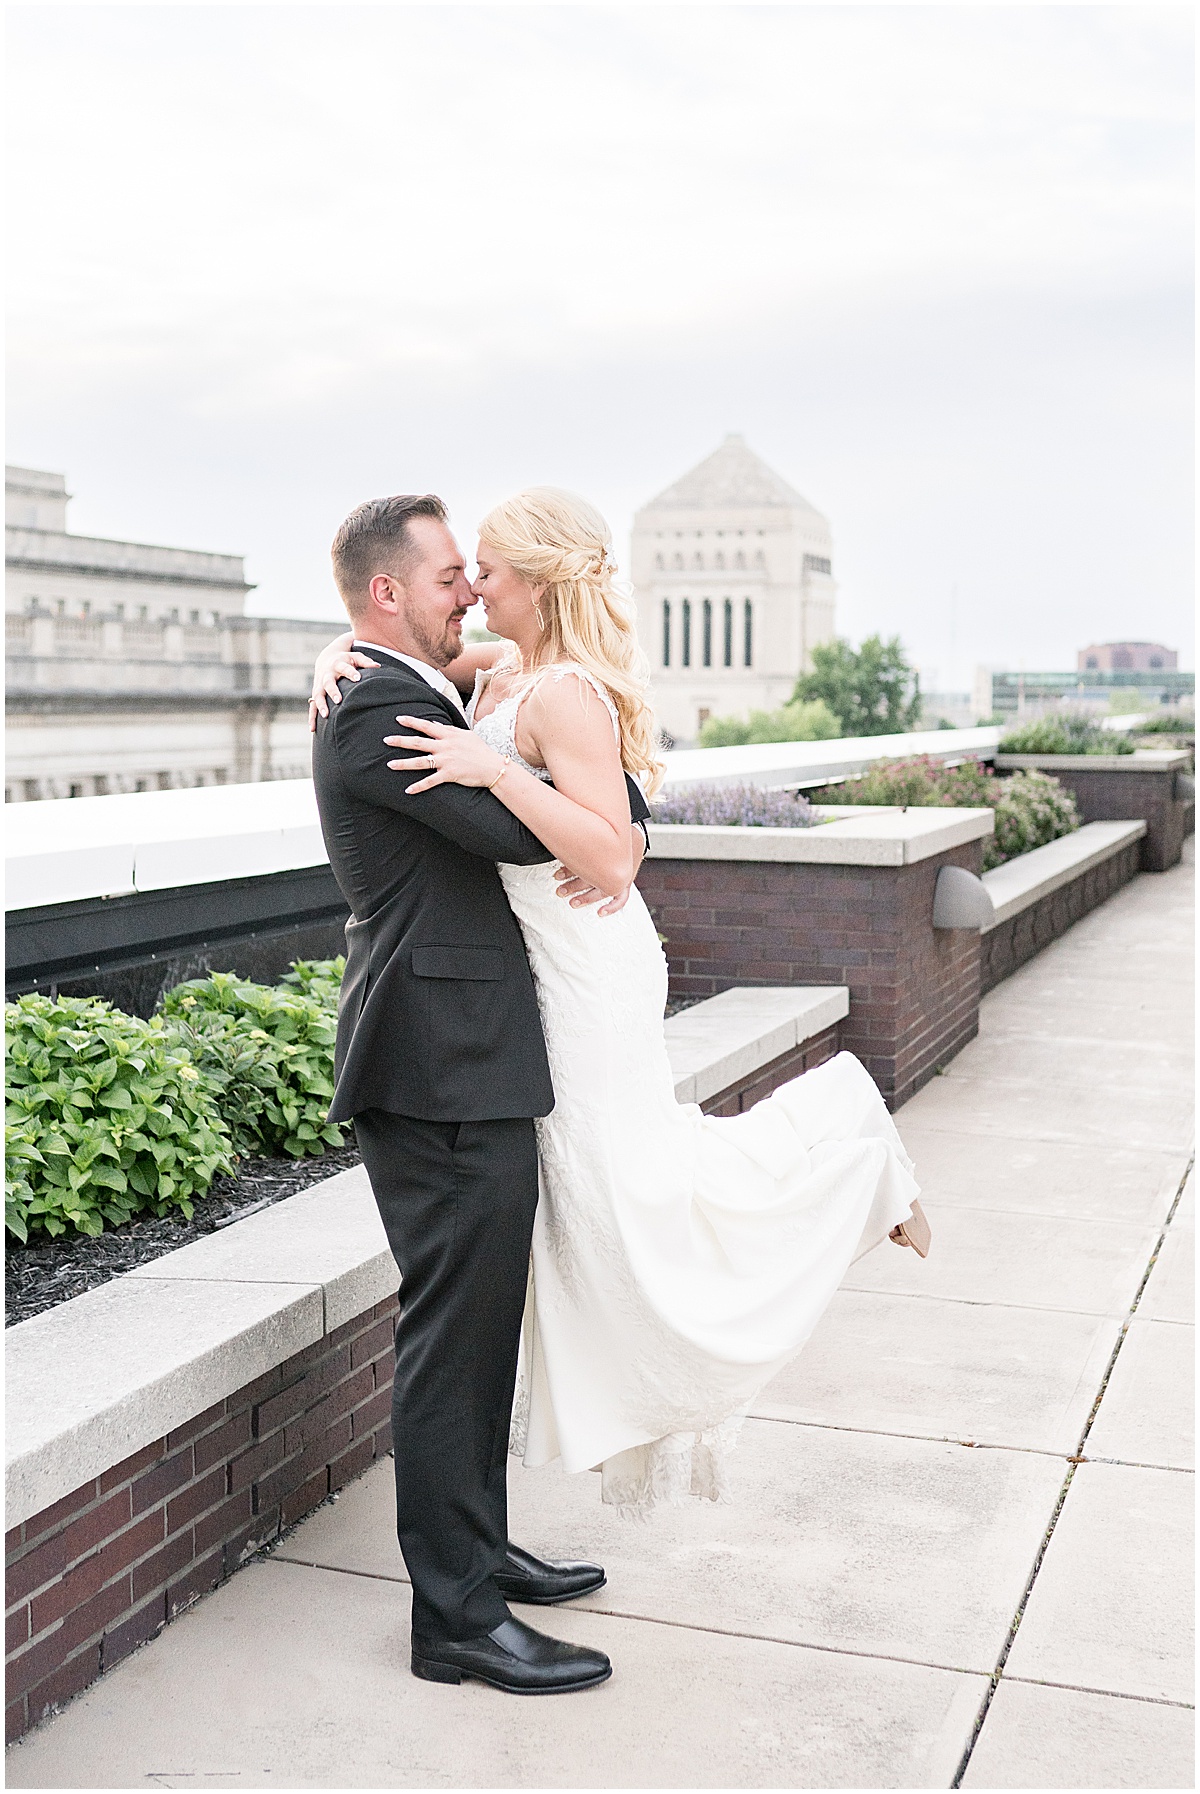 Tim & Victoria: Engagement Photos in Downtown Crown Point, Indiana